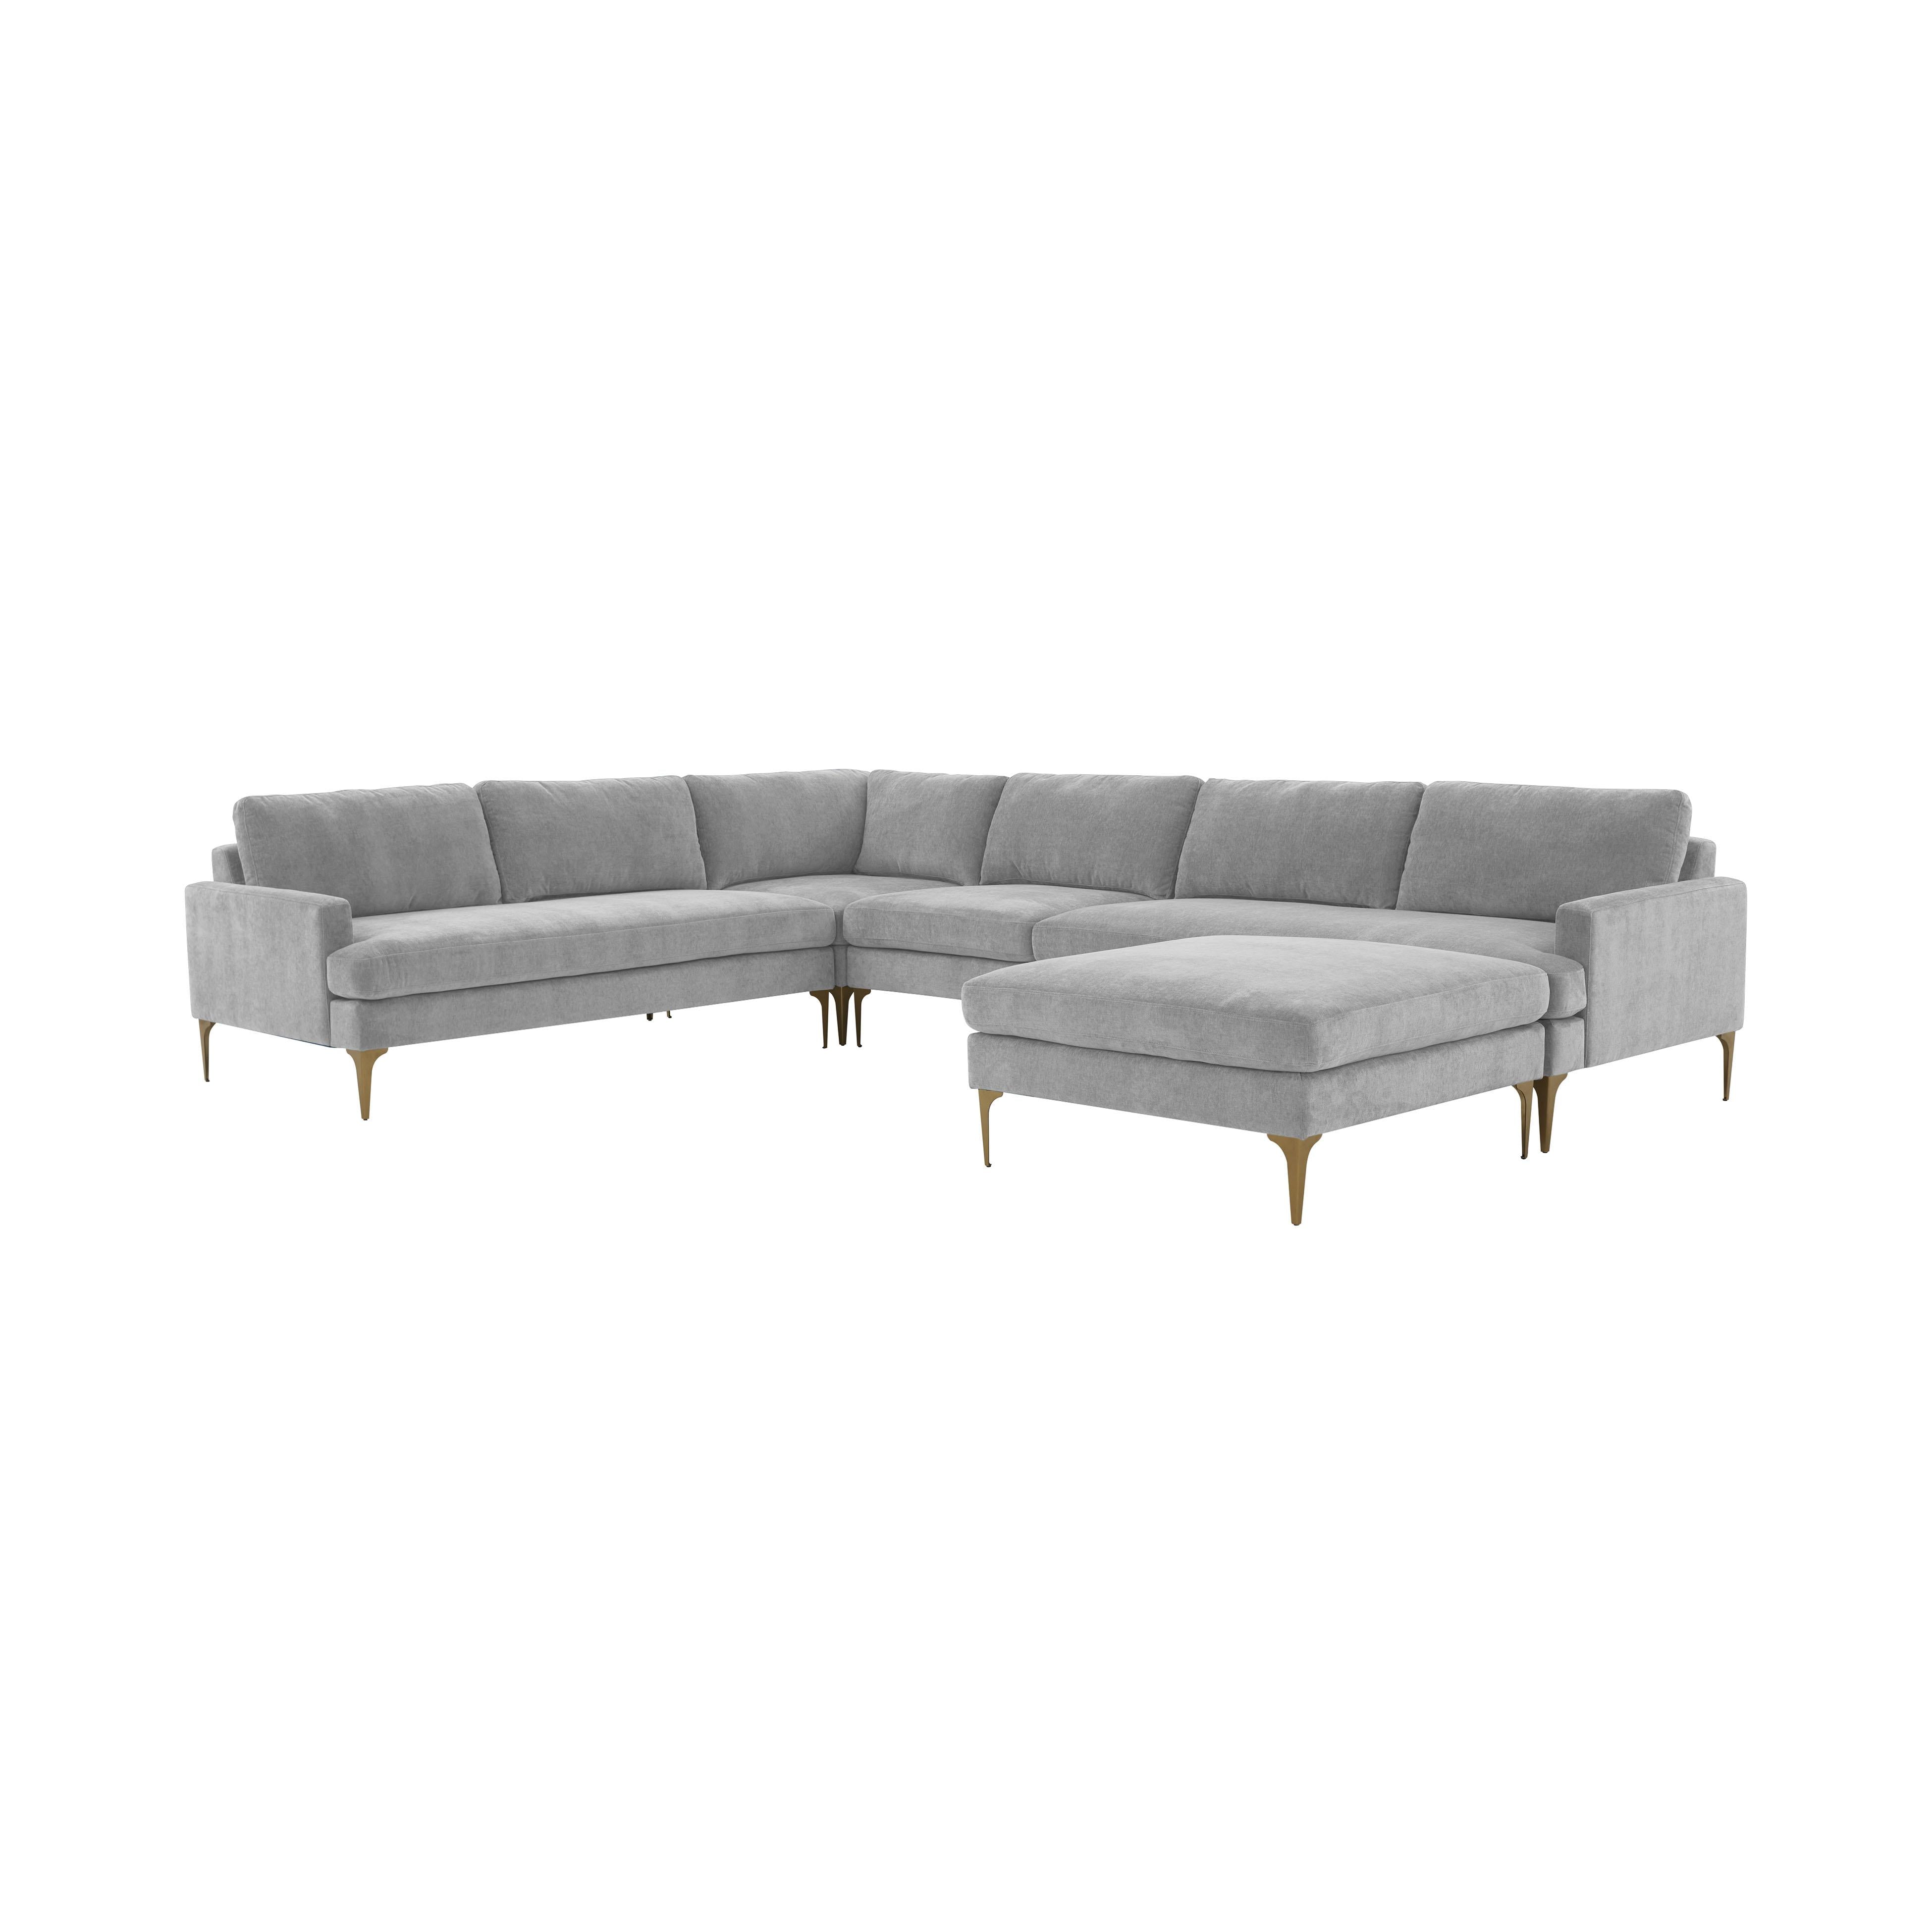 Tov Furniture Sectionals - Serena Gray Velvet Large Chaise Sectional